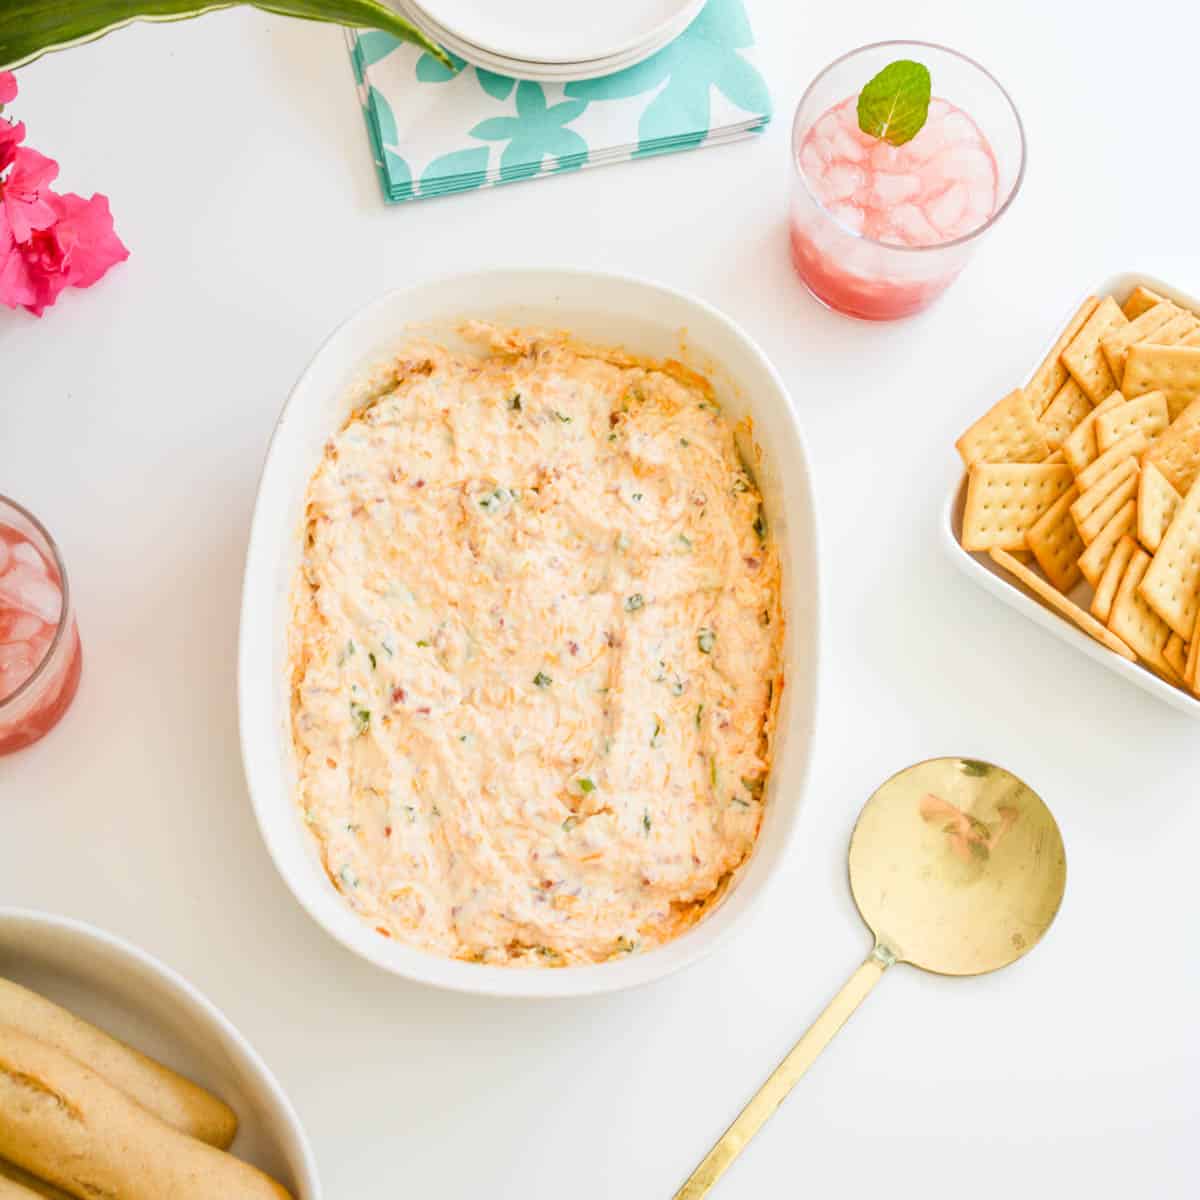 https://www.cupcakesandcutlery.com/wp-content/uploads/2020/10/hot-bacon-cheese-dip-featured-image.jpg